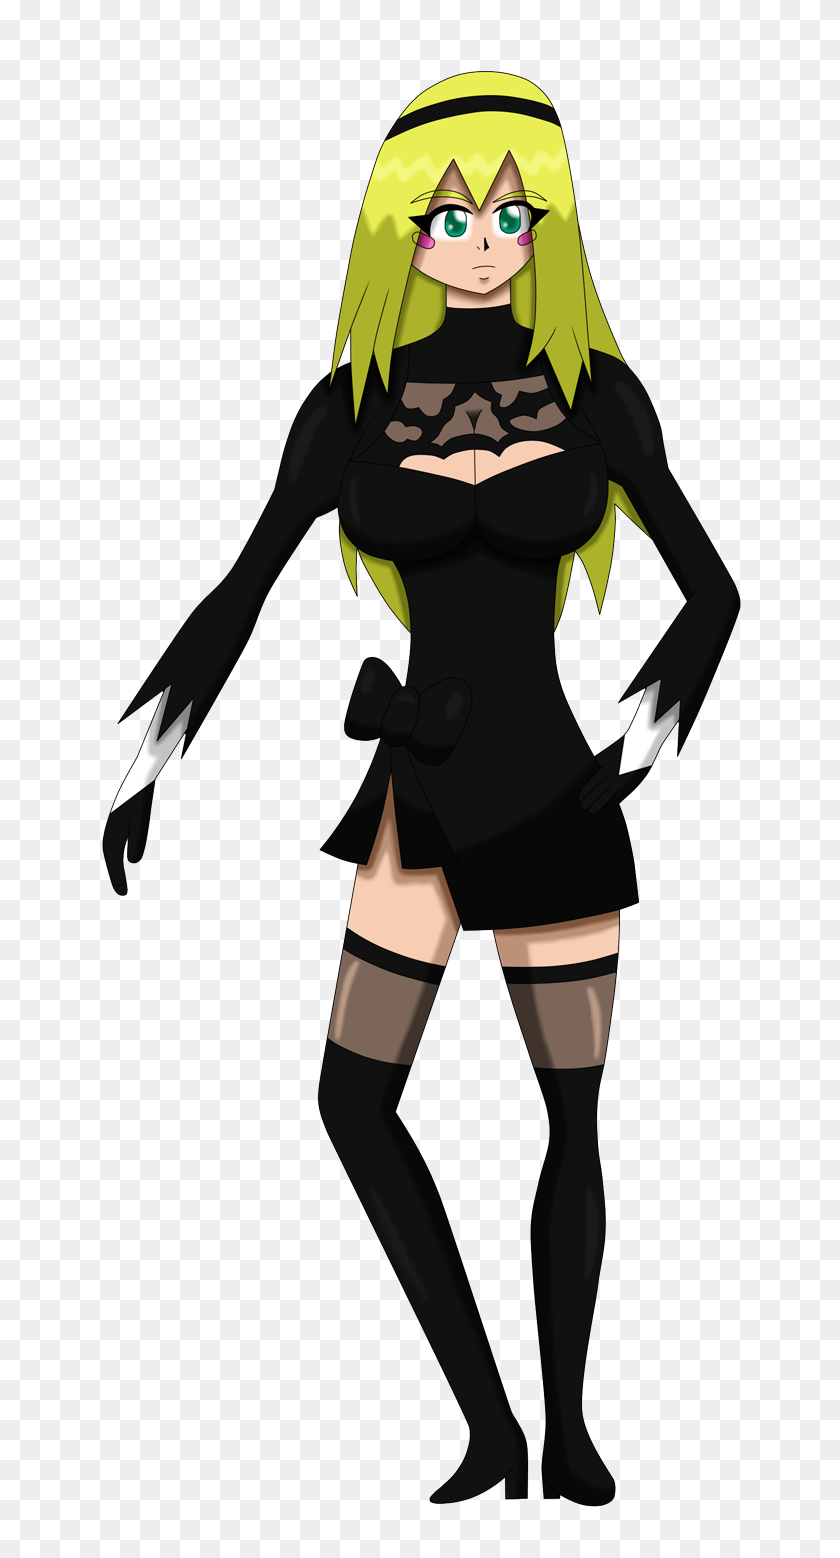 695x1498 Mago Oscuro Chica - Mago Oscuro Png